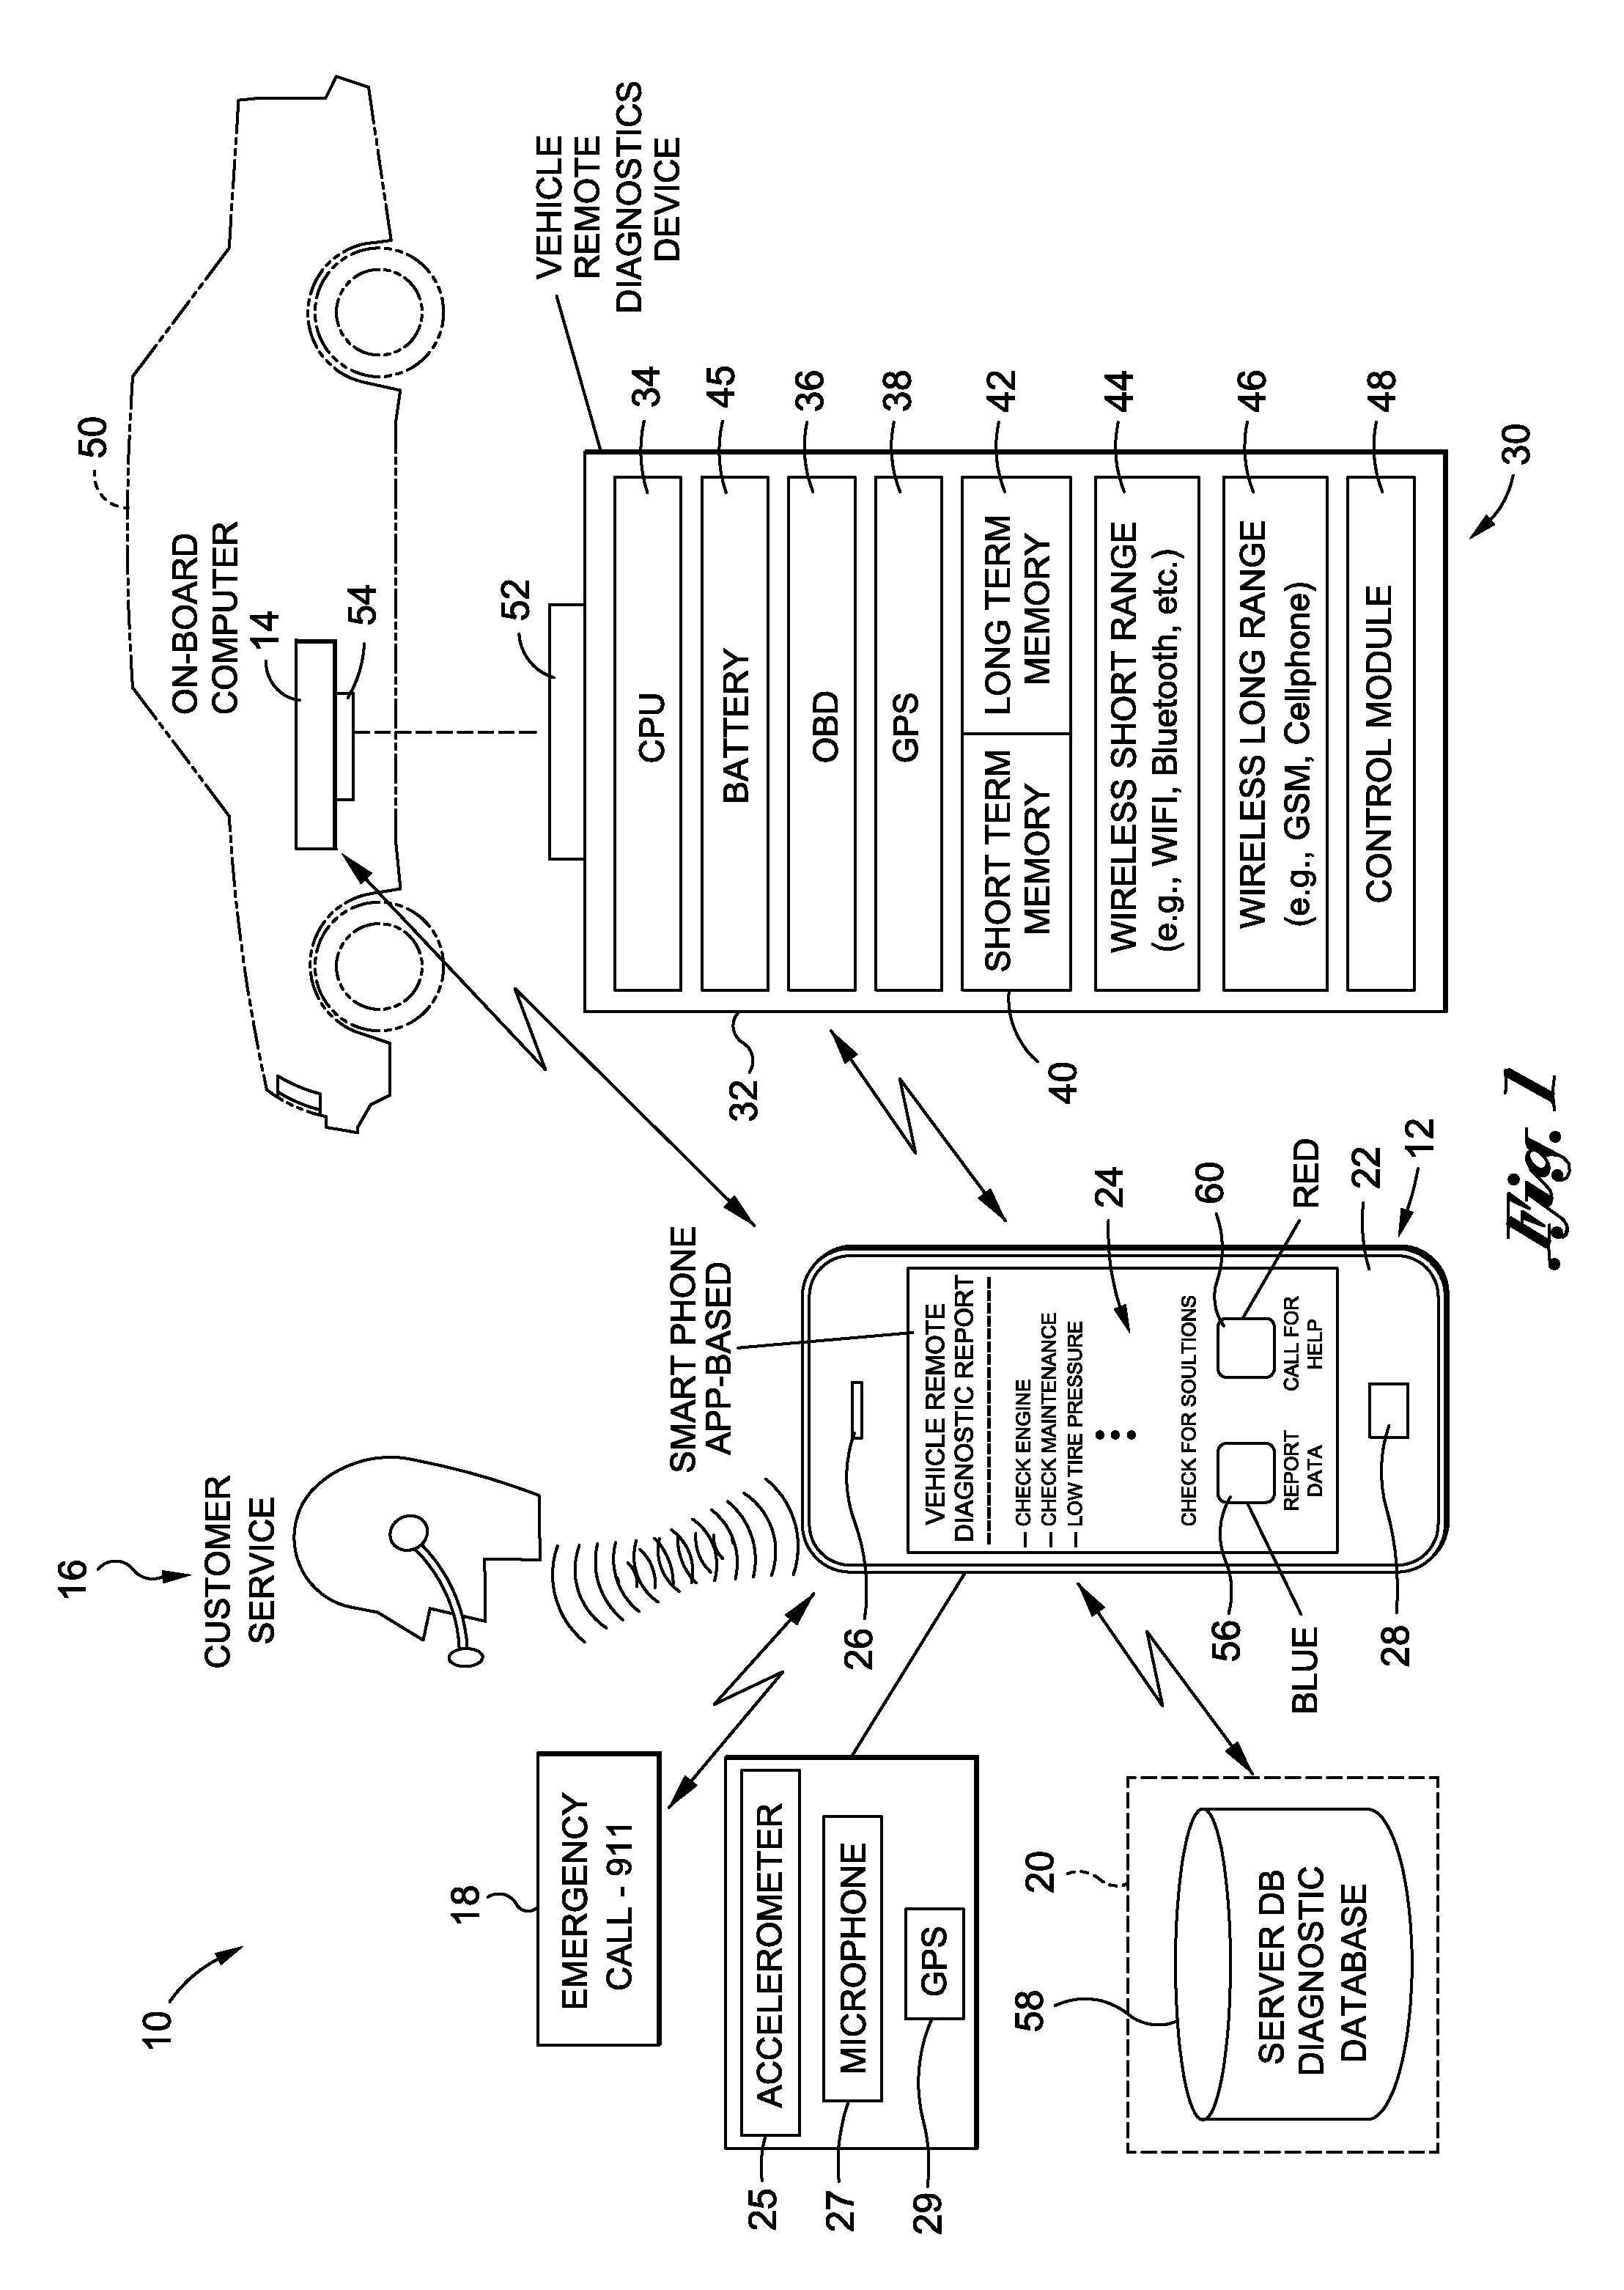 Smart phone app-based remote vehicle diagnostic system and method